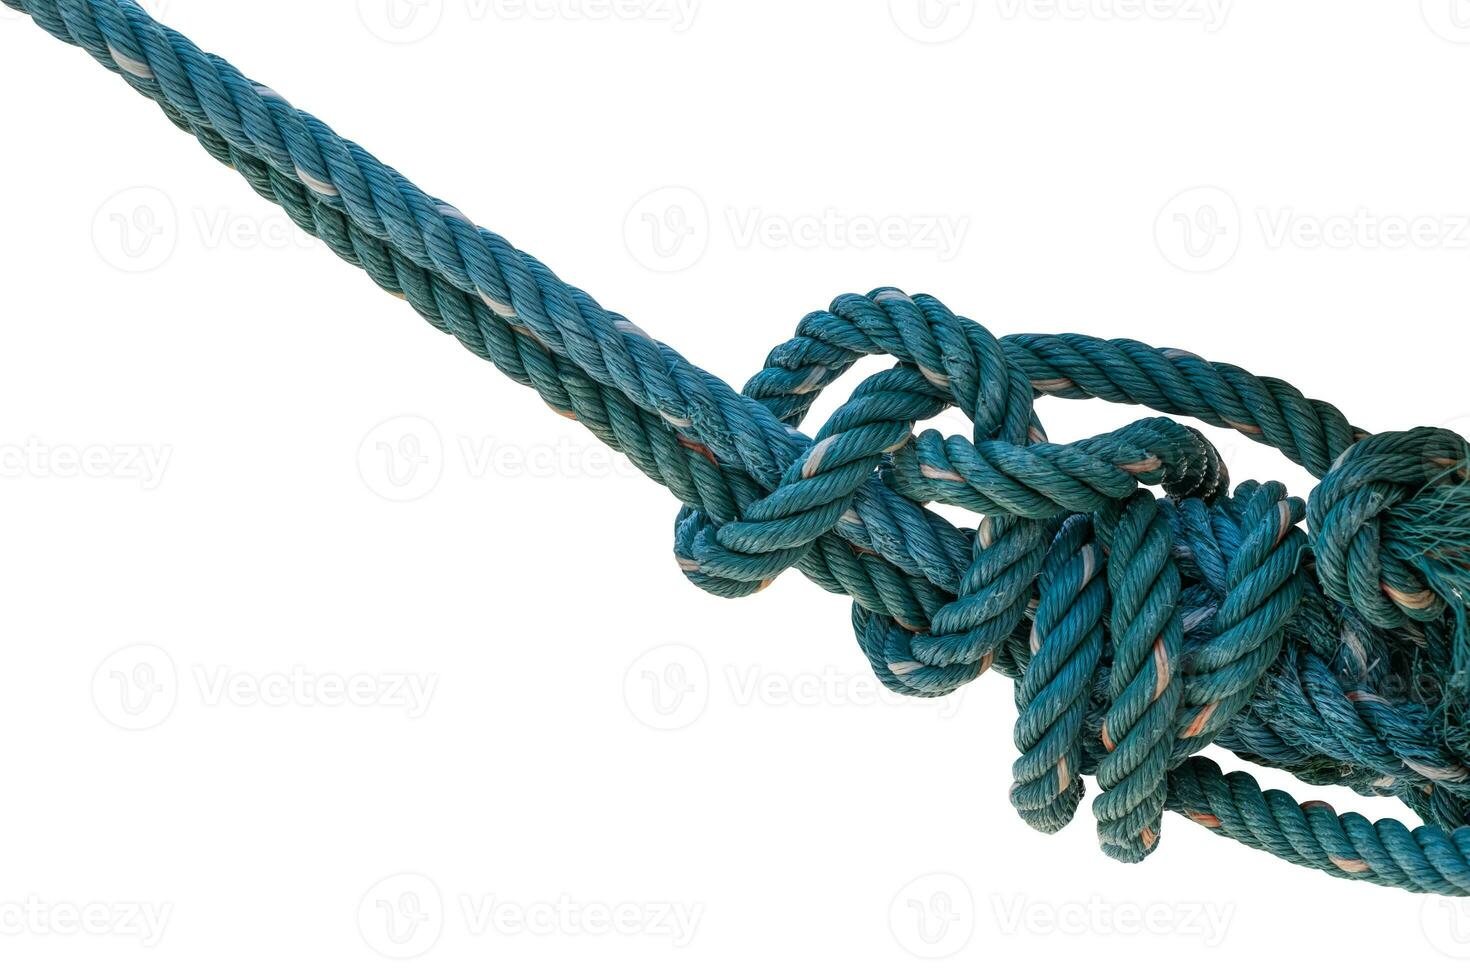 Rope tied against white background. Have clipping path photo